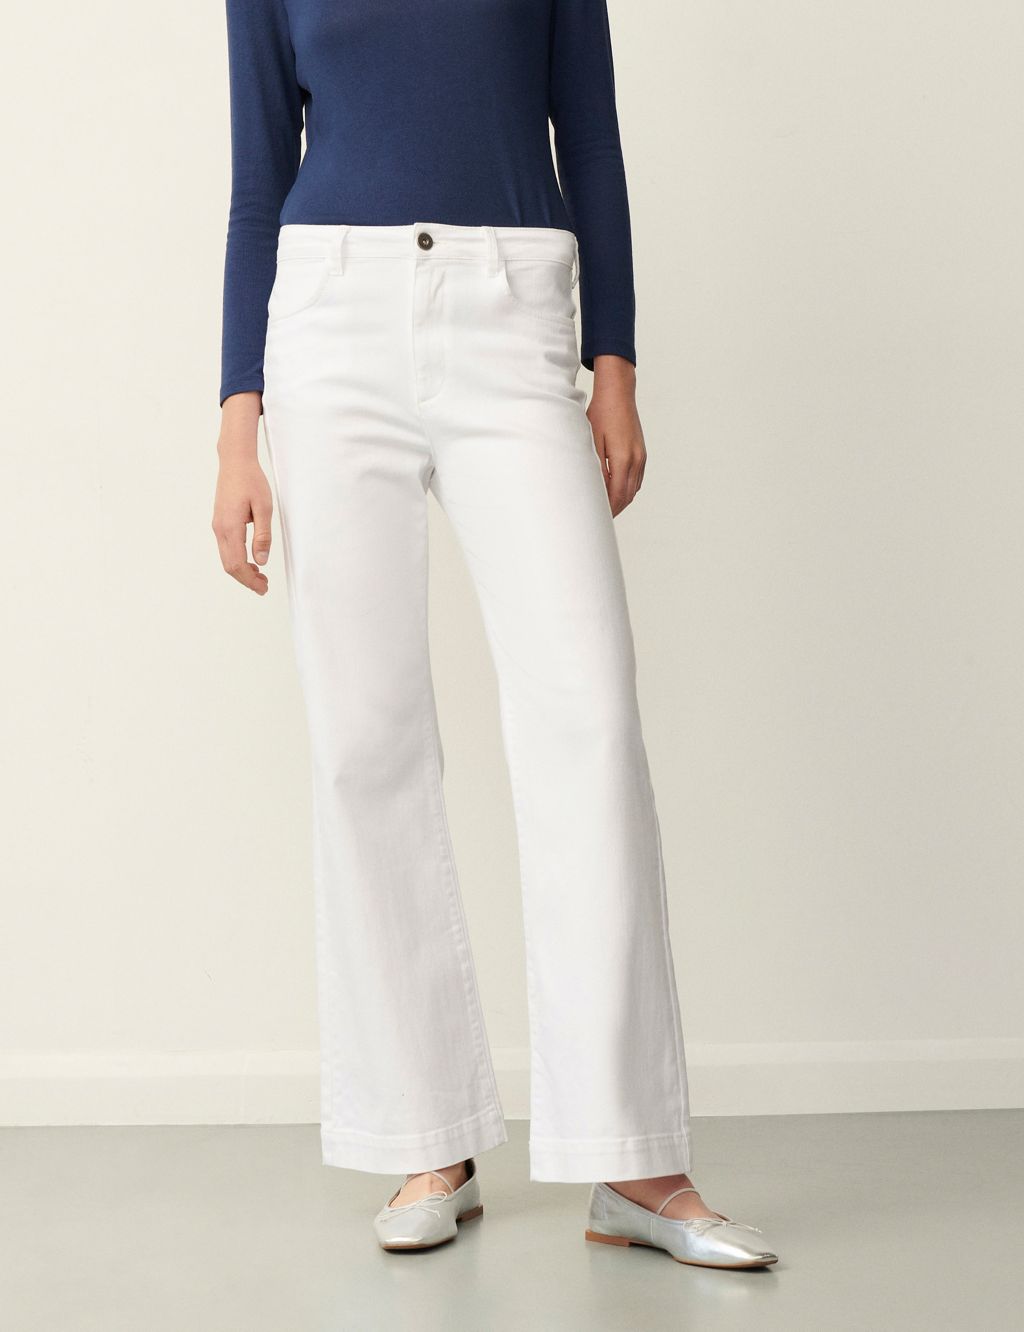 High Waisted Flared Jeans image 3